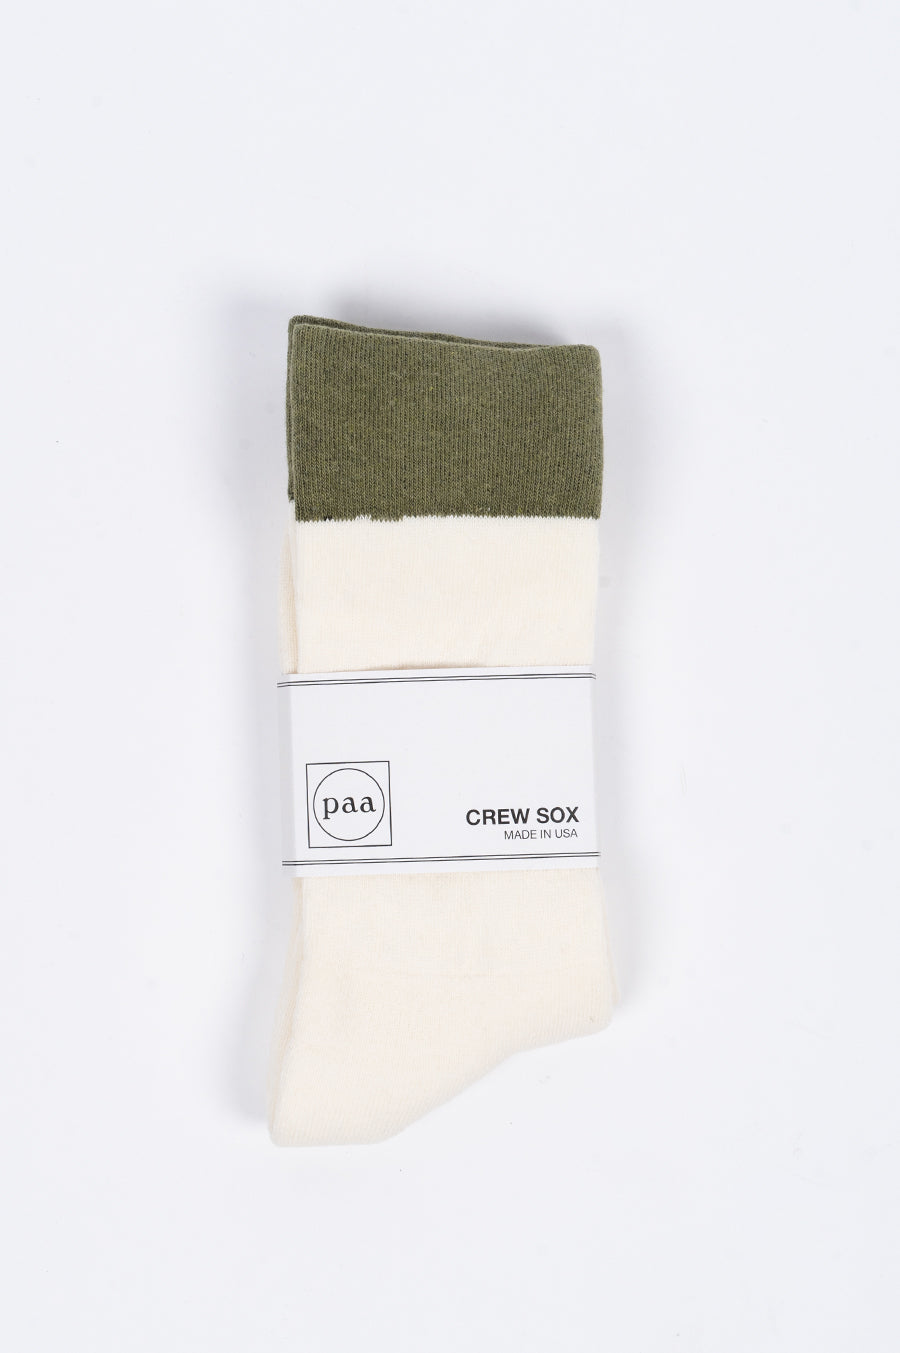 HOUSE OF PAA CREW SOX 2.5 ECRU OLIVE - BLENDS